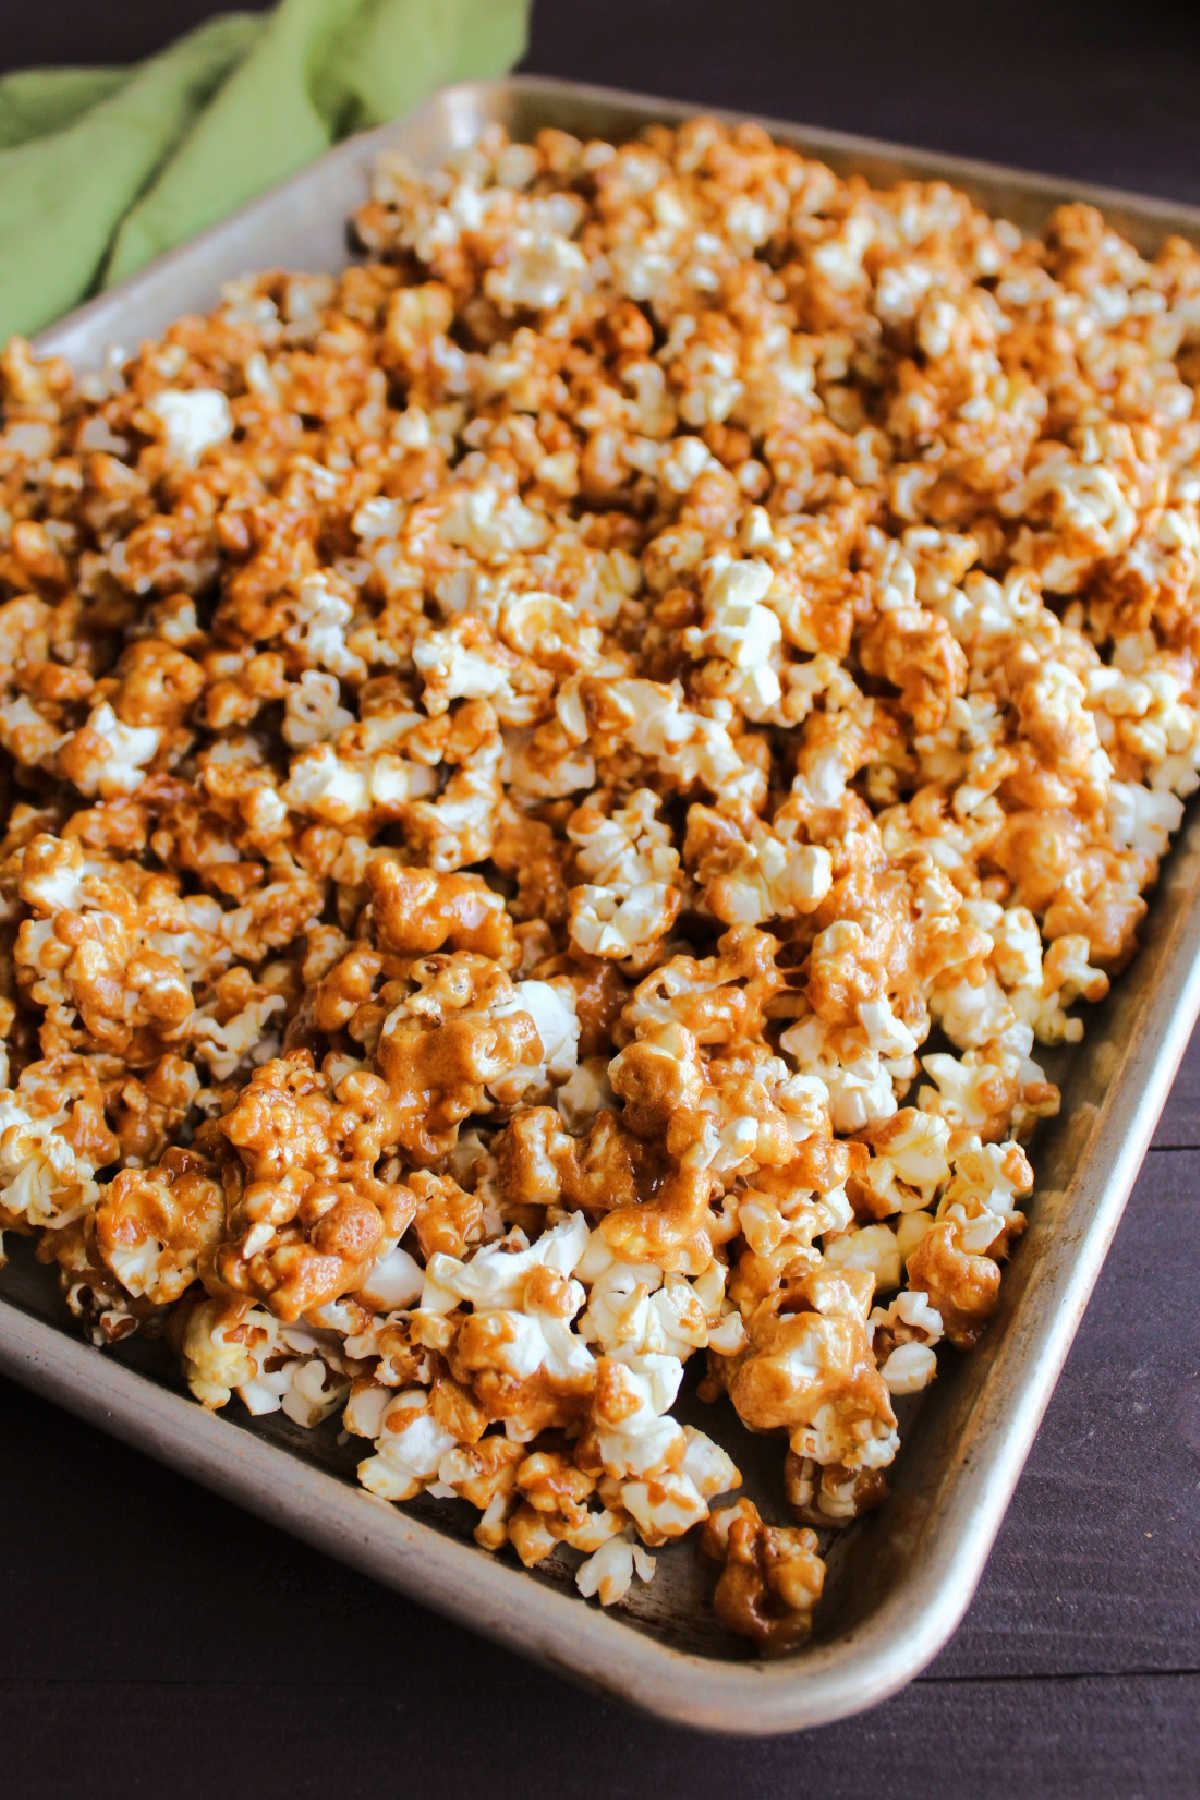 Rimmed half sheet pan filled with peanut butter coated popcorn fresh from the oven.